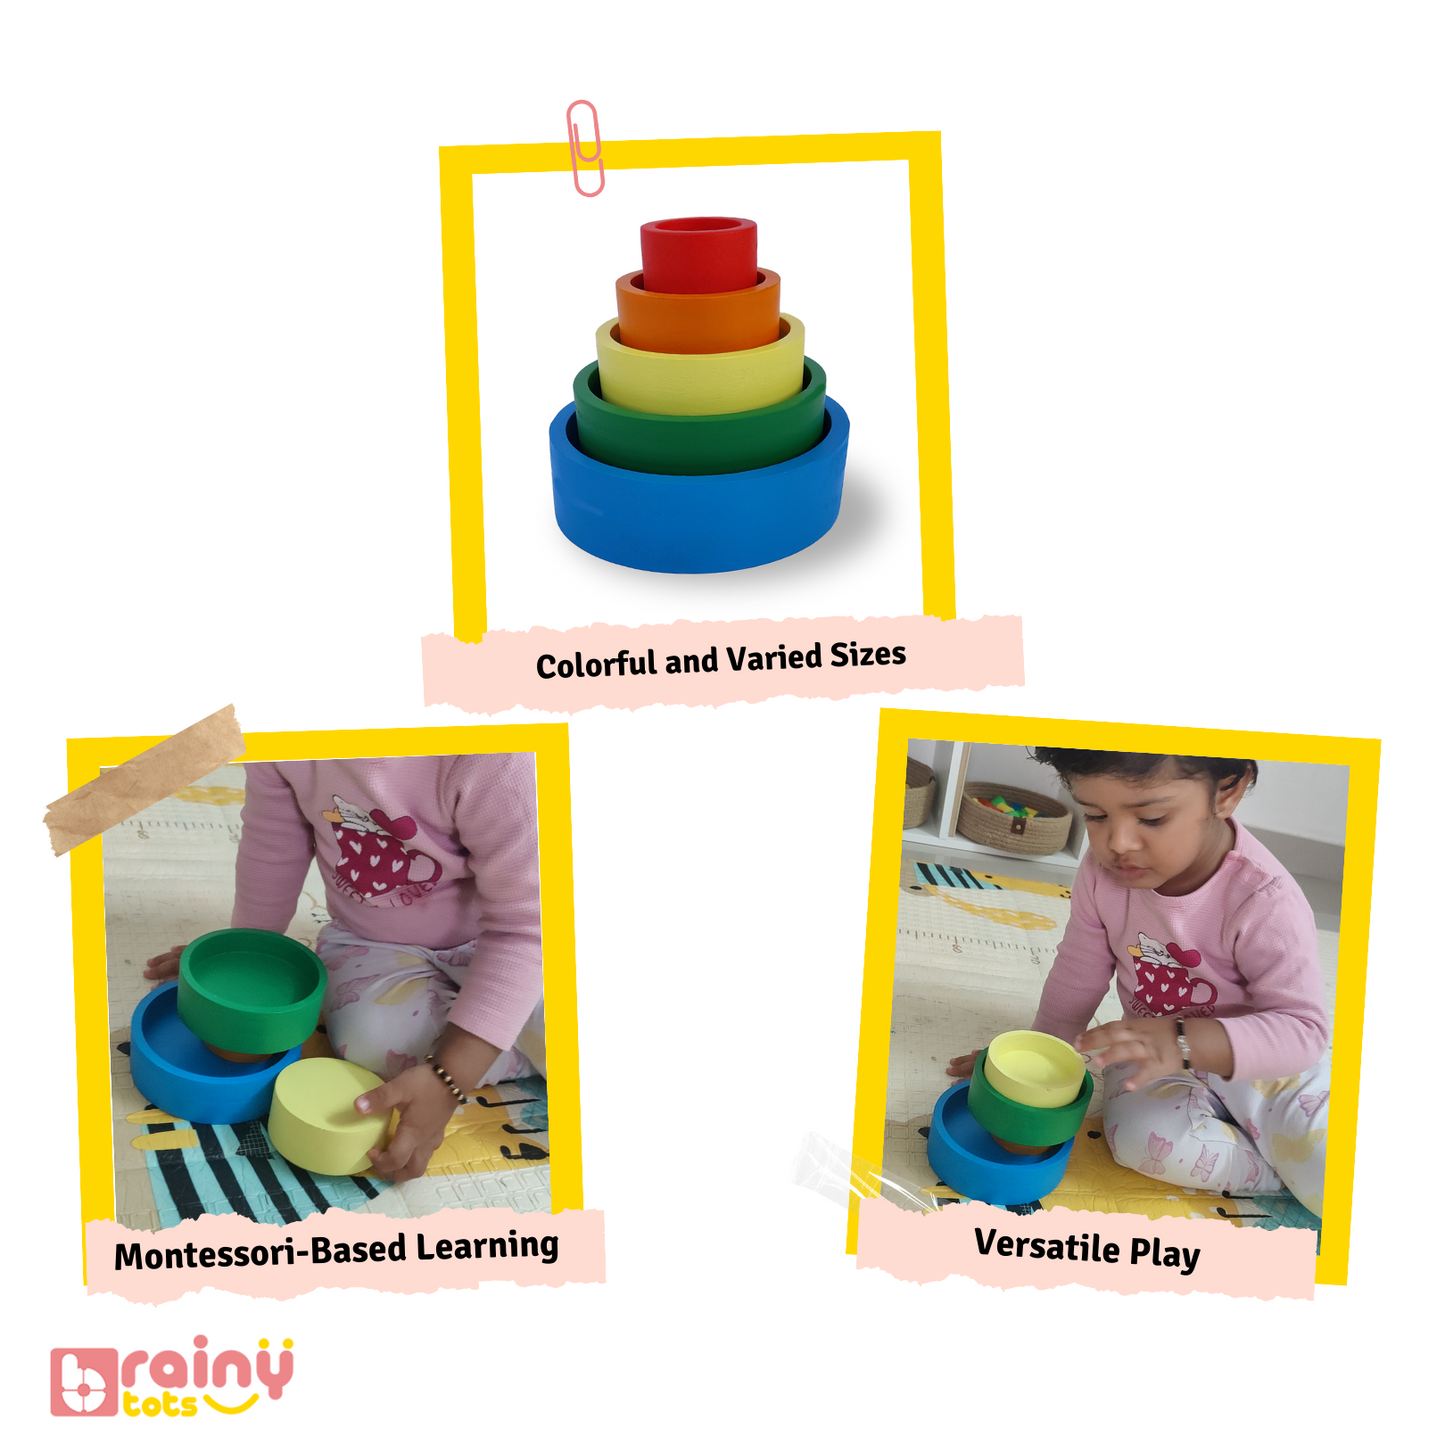 Features of our Nesting Bowls, designed for babies aged 6 months and up. These Montessori toys enhance problem-solving skills, fine motor abilities, and cognitive development. Made from safe, durable materials, they are perfect for stacking, sorting, and sensory exploration. Ideal for early learning and interactive play.